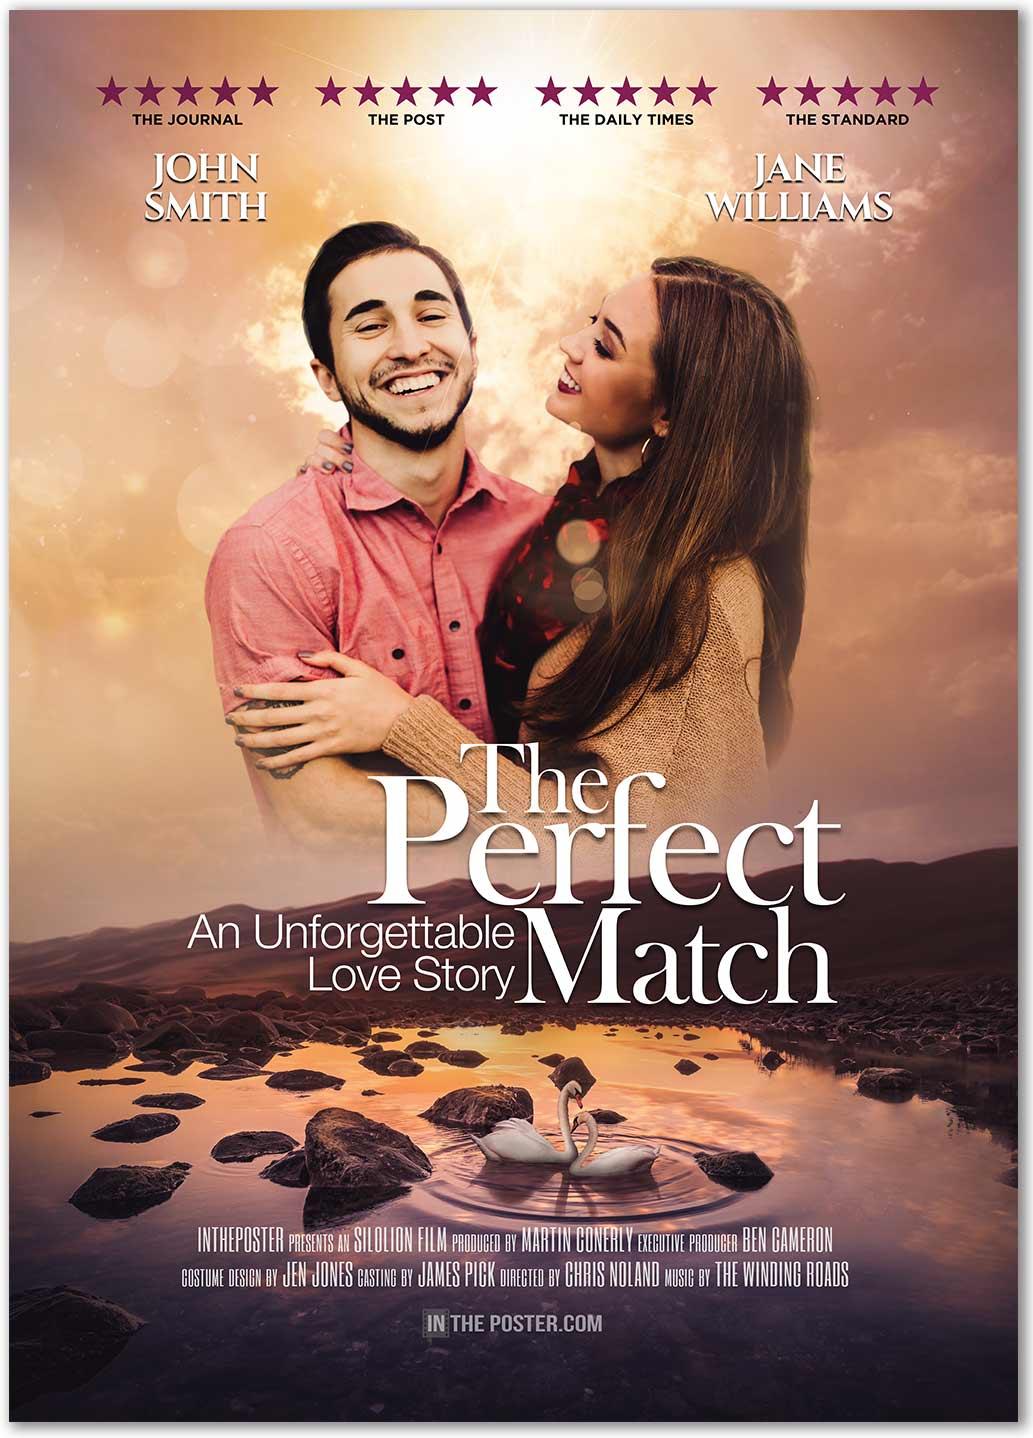 A romantic movie poster design with happy smiling couple above rolling hills and a lack with swans and a reflection of the sunrise